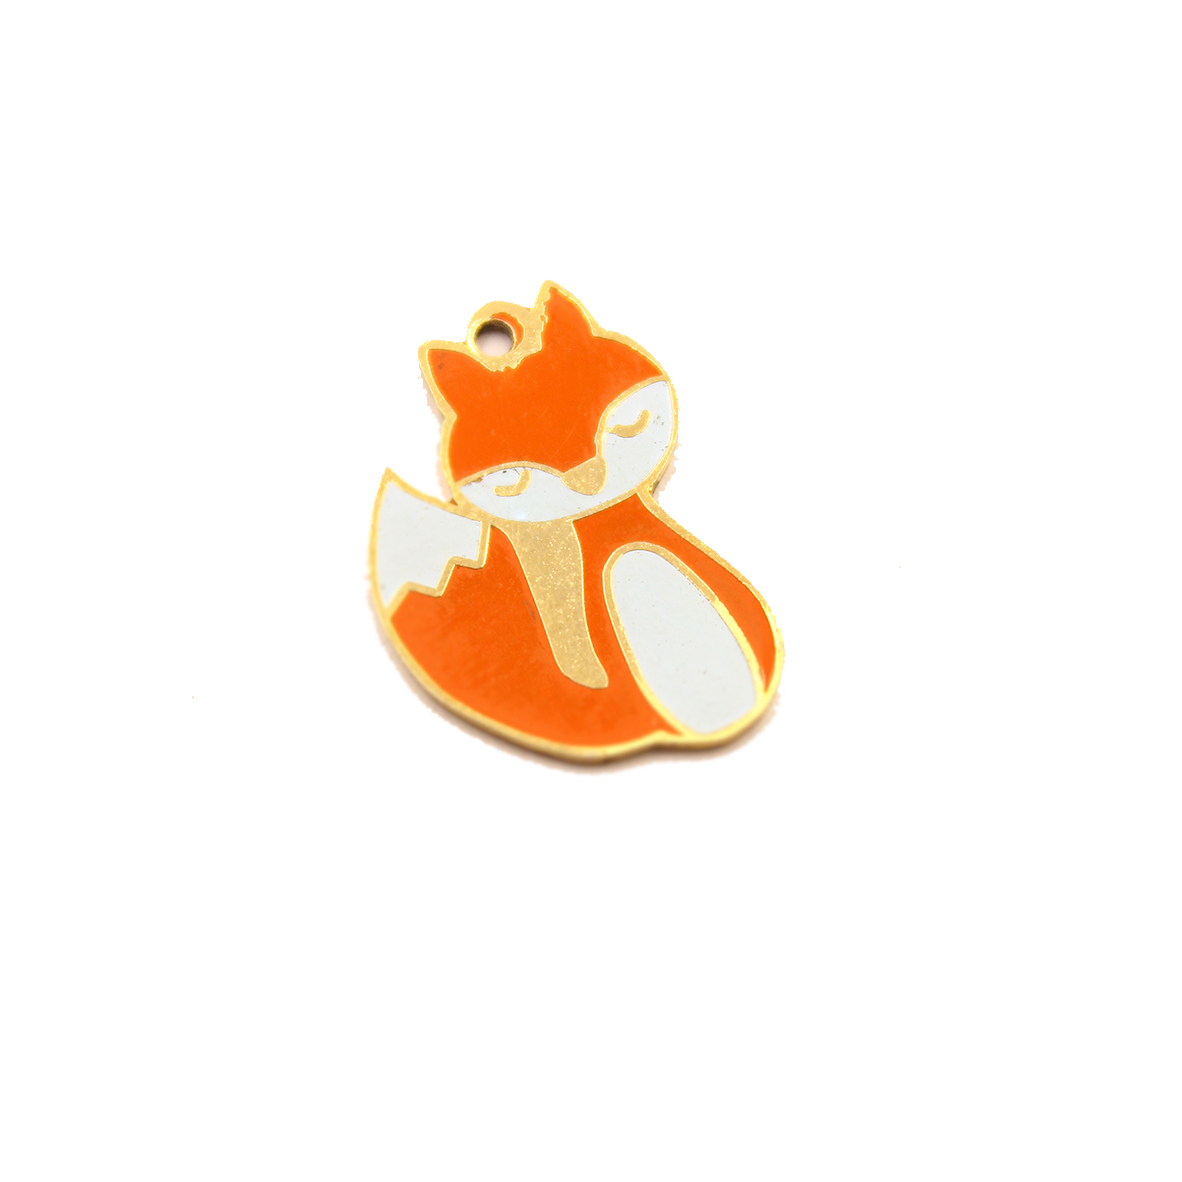 The Fox Charms for your bracelets and necklace and customized charms